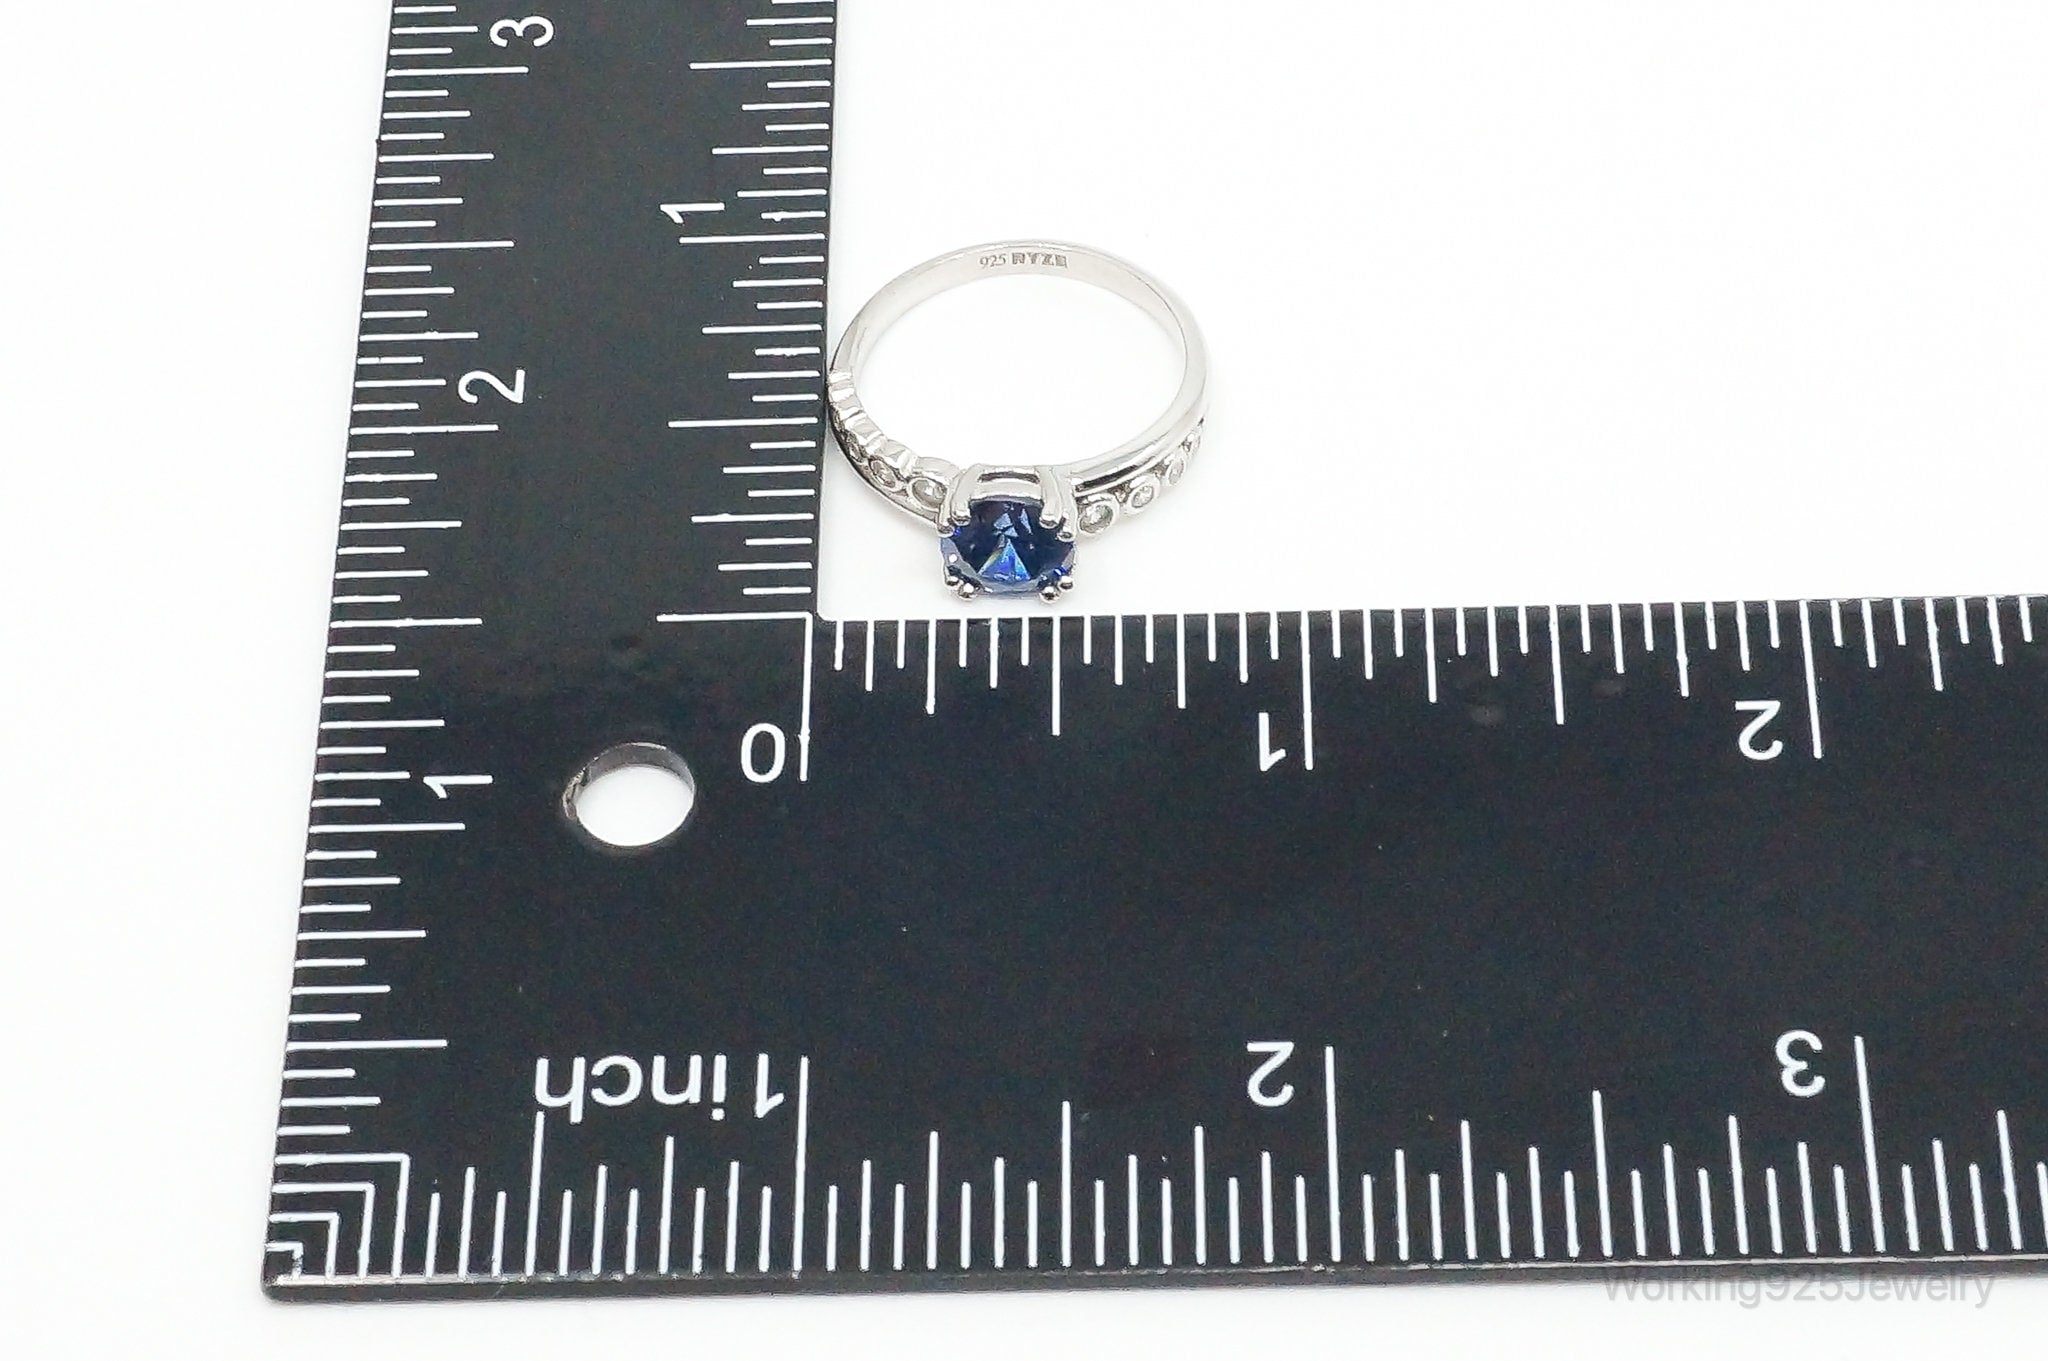 Blue & White Cubic Zirconia Sterling Silver Ring - Size 7